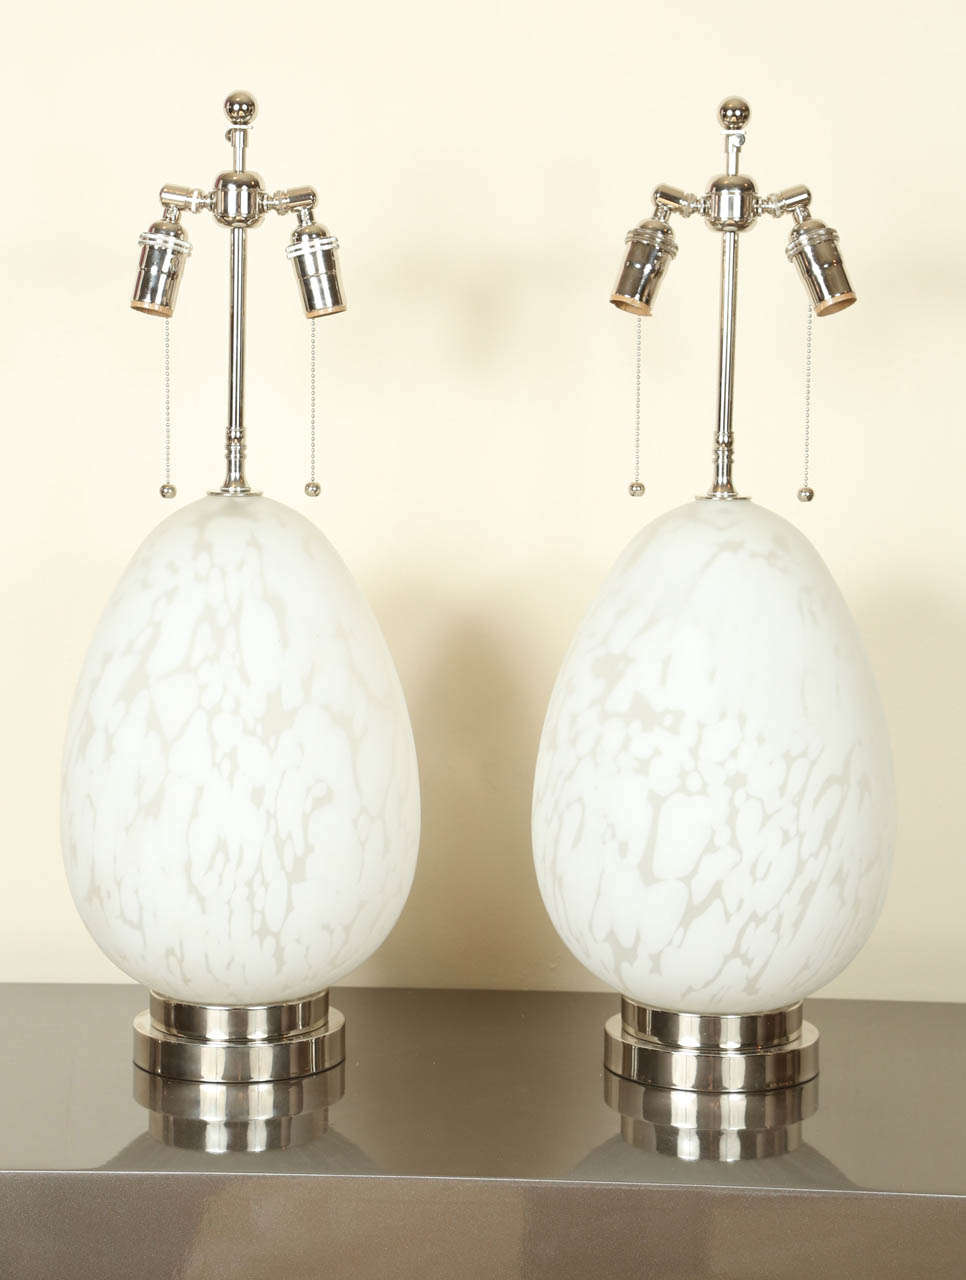 Pair of beautiful Italian glass lamps. The bases are egg shaped translucent glass embedded with white swirls. They have been newly rewired and provided with nickel bases and double cluster hardware